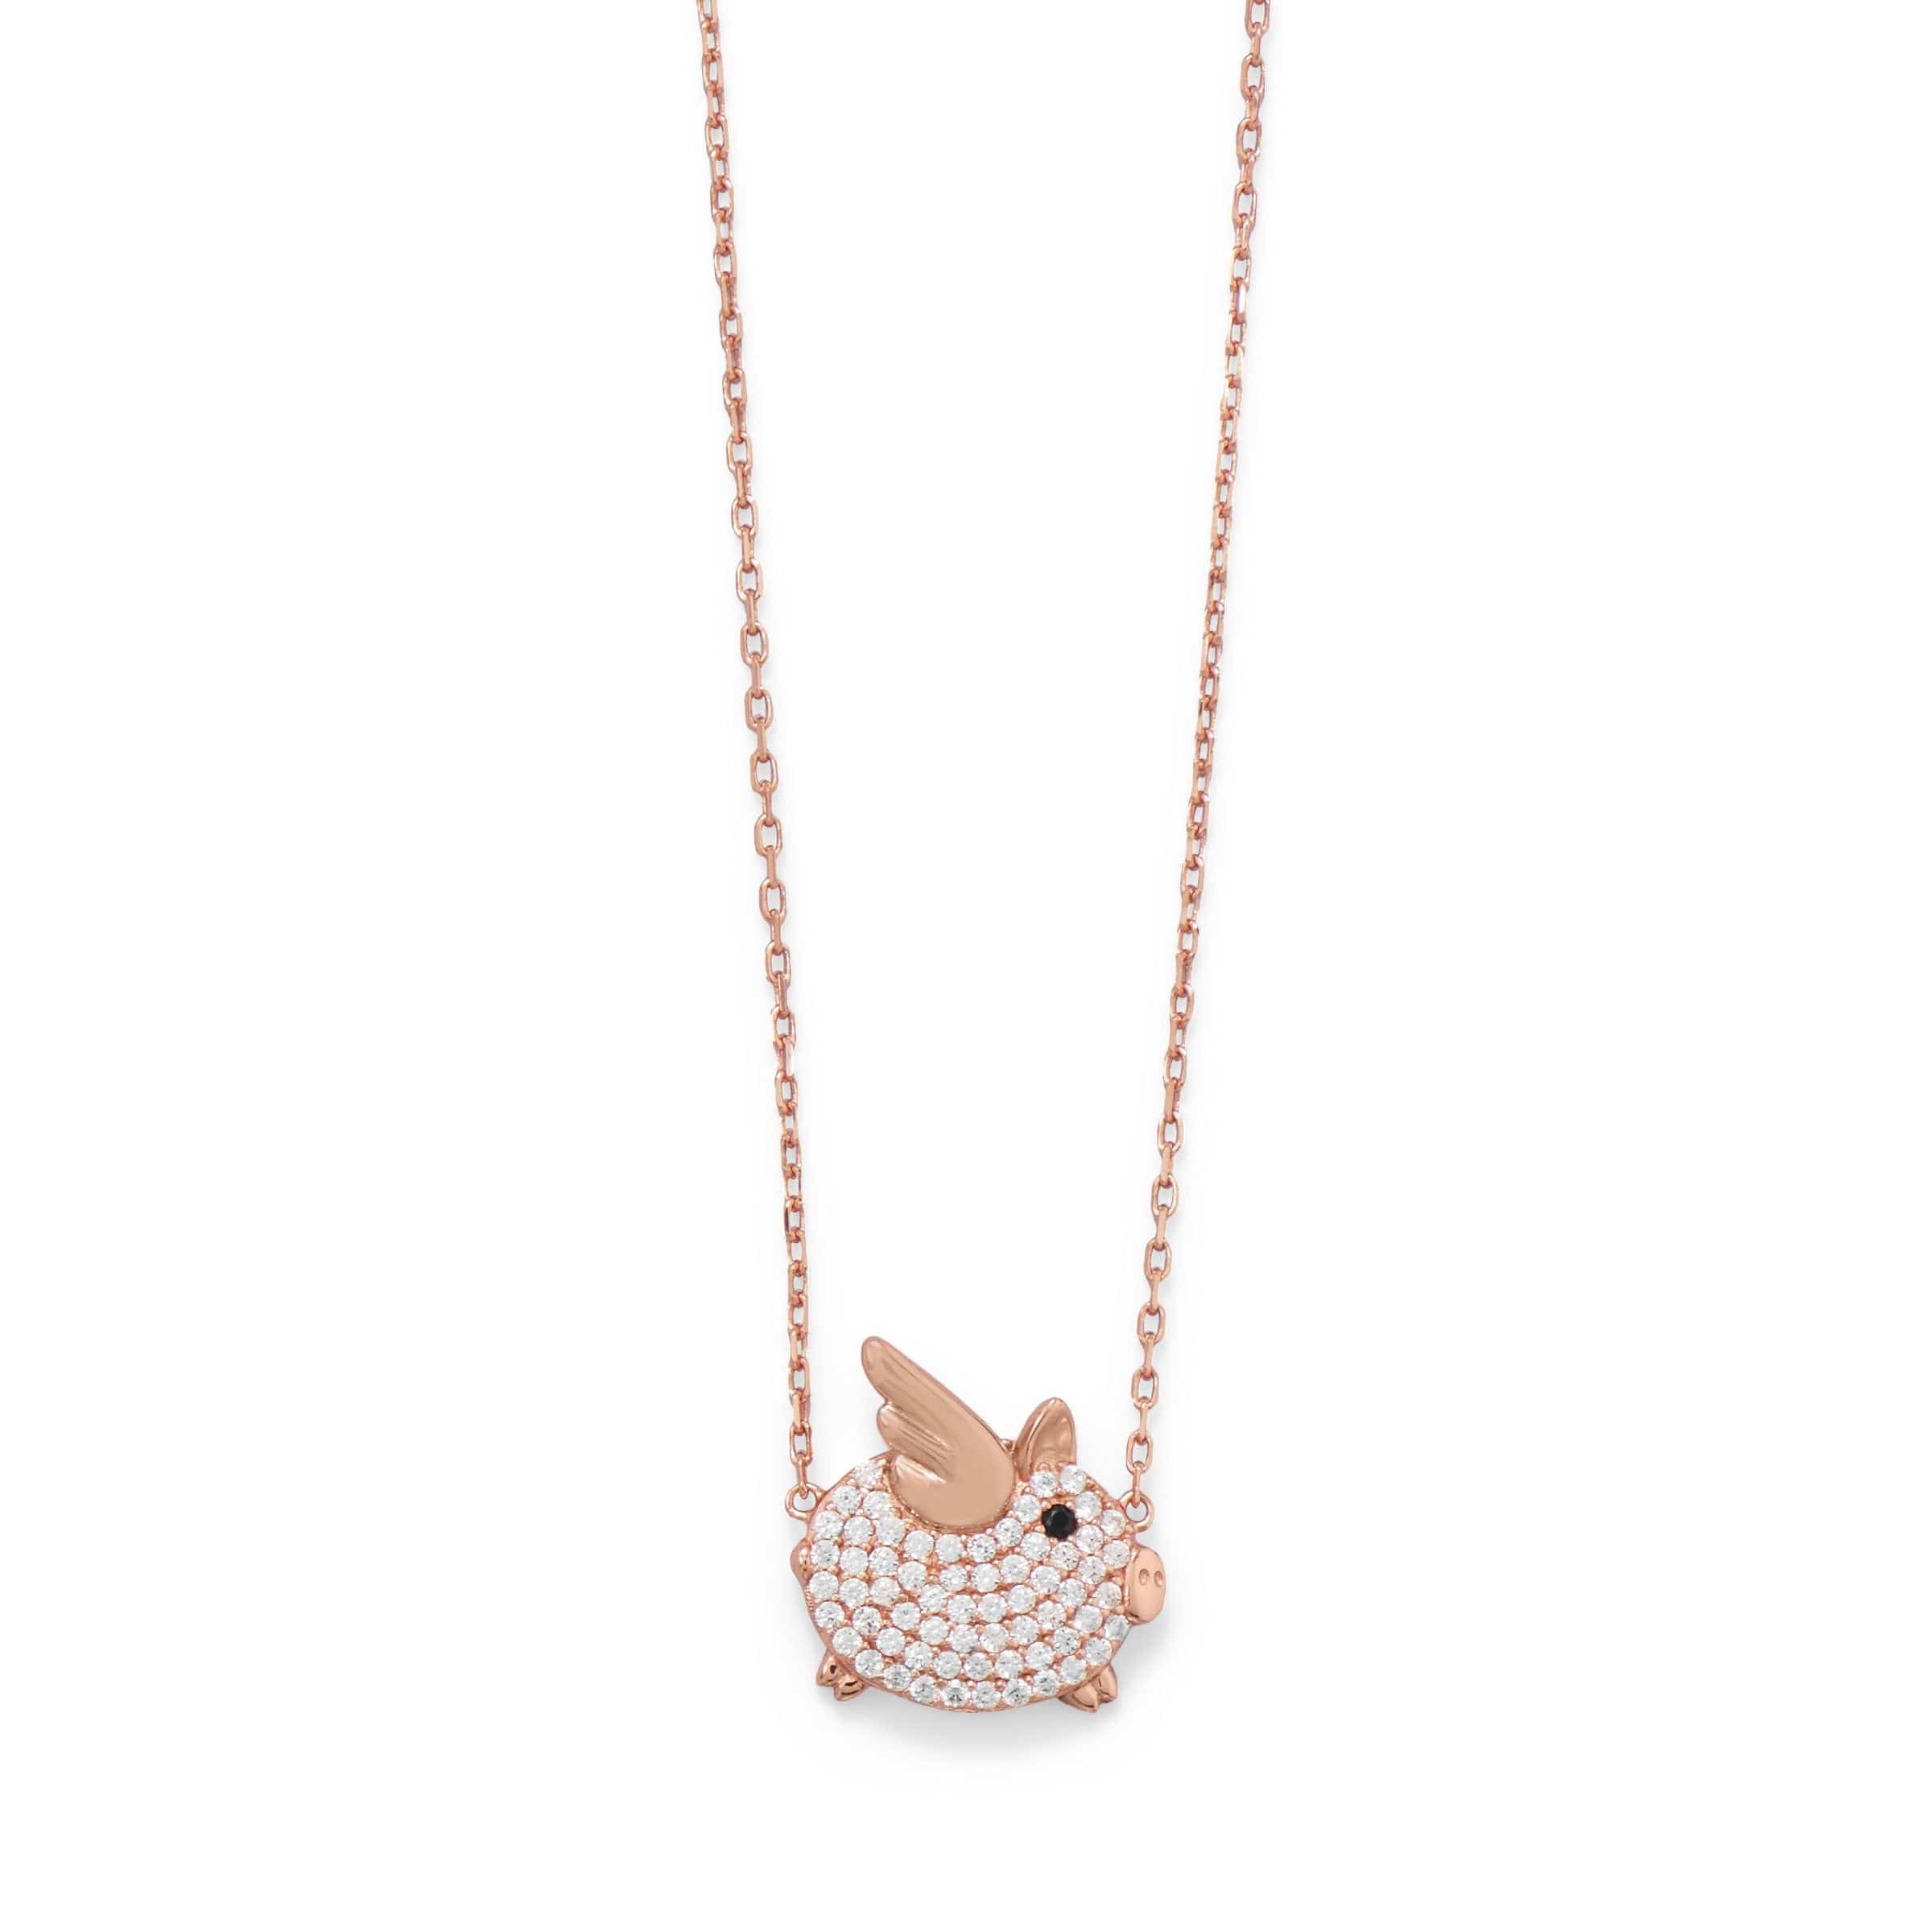 Flying Pig Necklace Sterling Silver with Cubic Zirconia and Gold Plating - The Pink Pigs, Animal Lover's Boutique